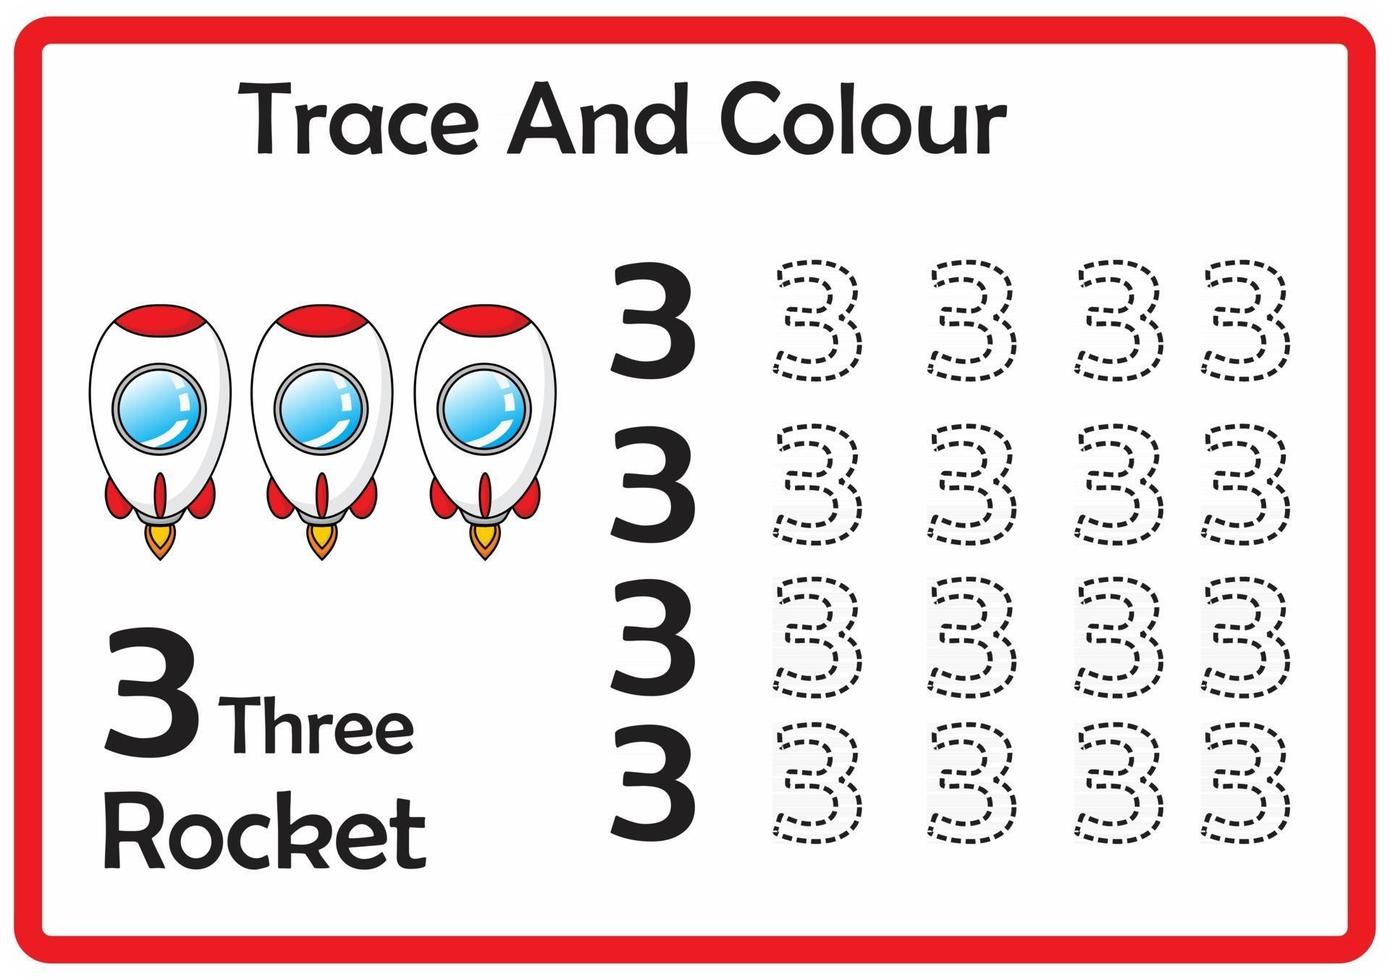 trace and colour rocket number 3 vector